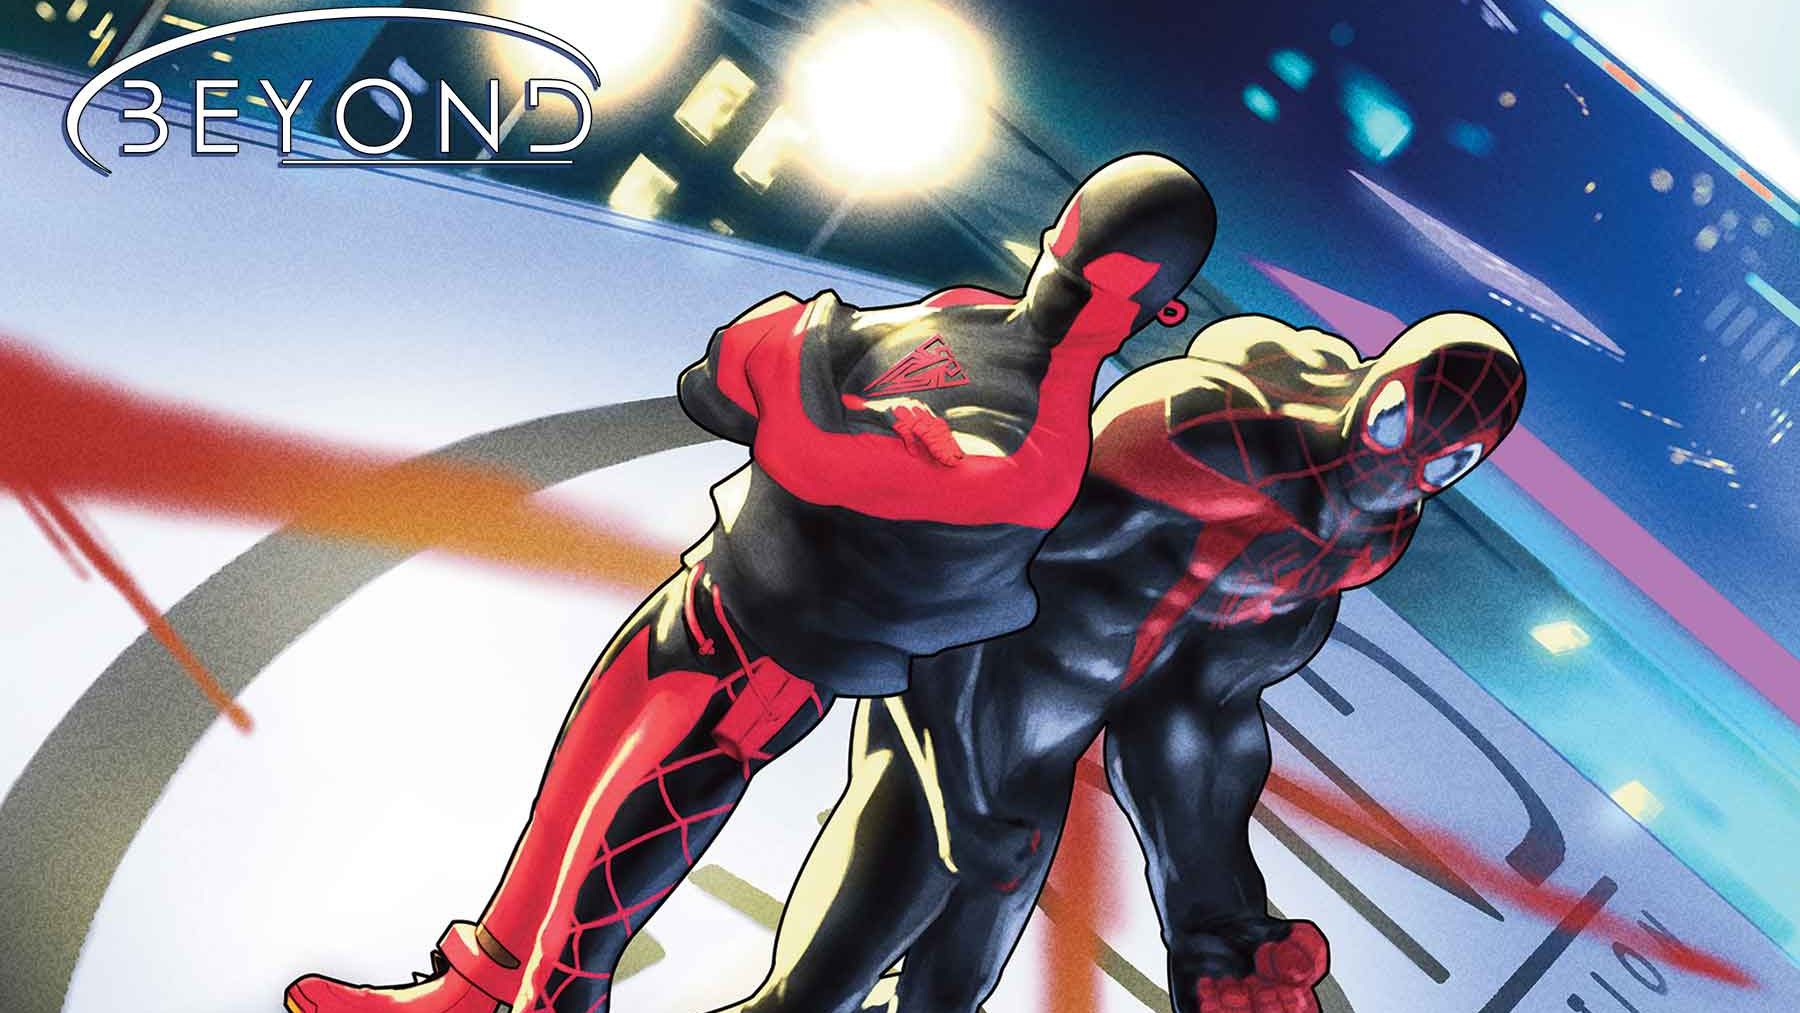 BEN REILLY VS MILES MORALES AS THE BEYOND ERA OF AMAZING SPIDER-MAN HEATS UP IN DECEMBER